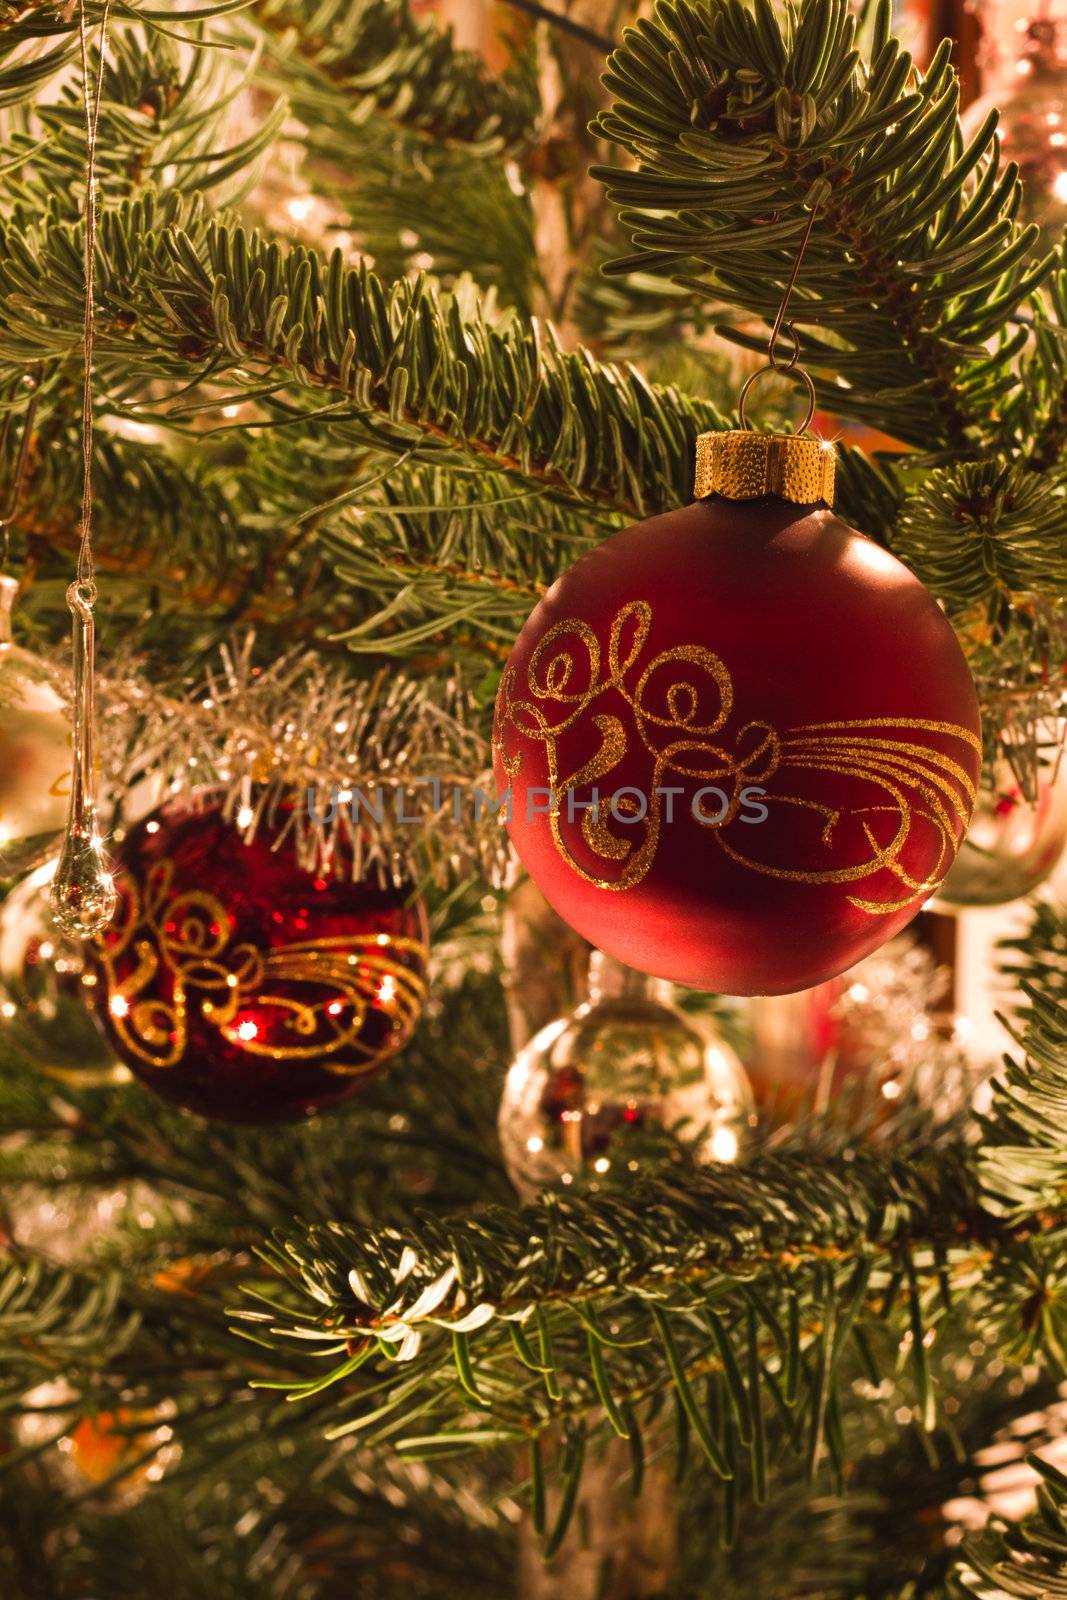 Colorful image of balls in christmas tree by Colette